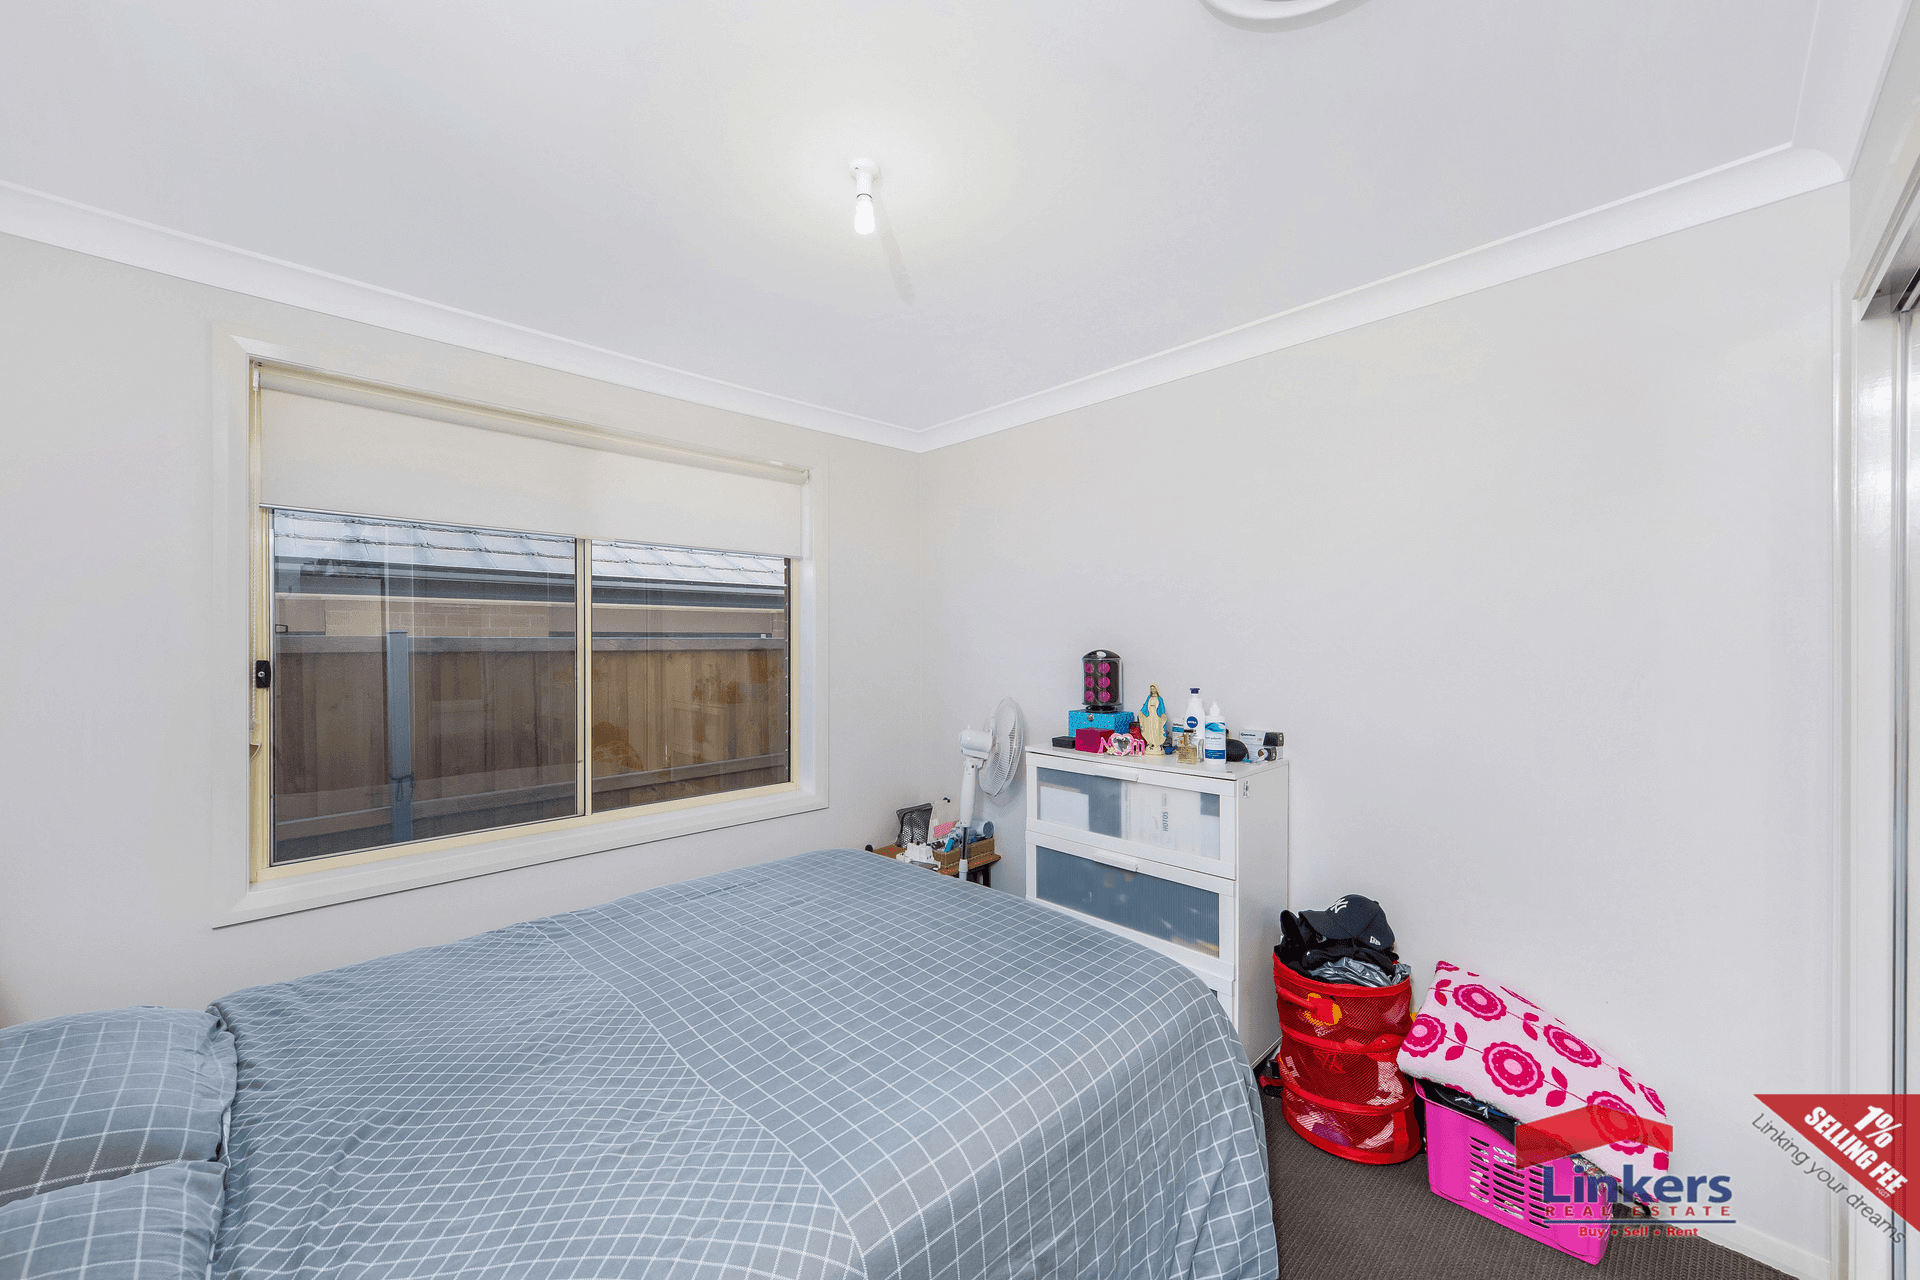 Number 5 Buckley Avenue, Airds, NSW 2560